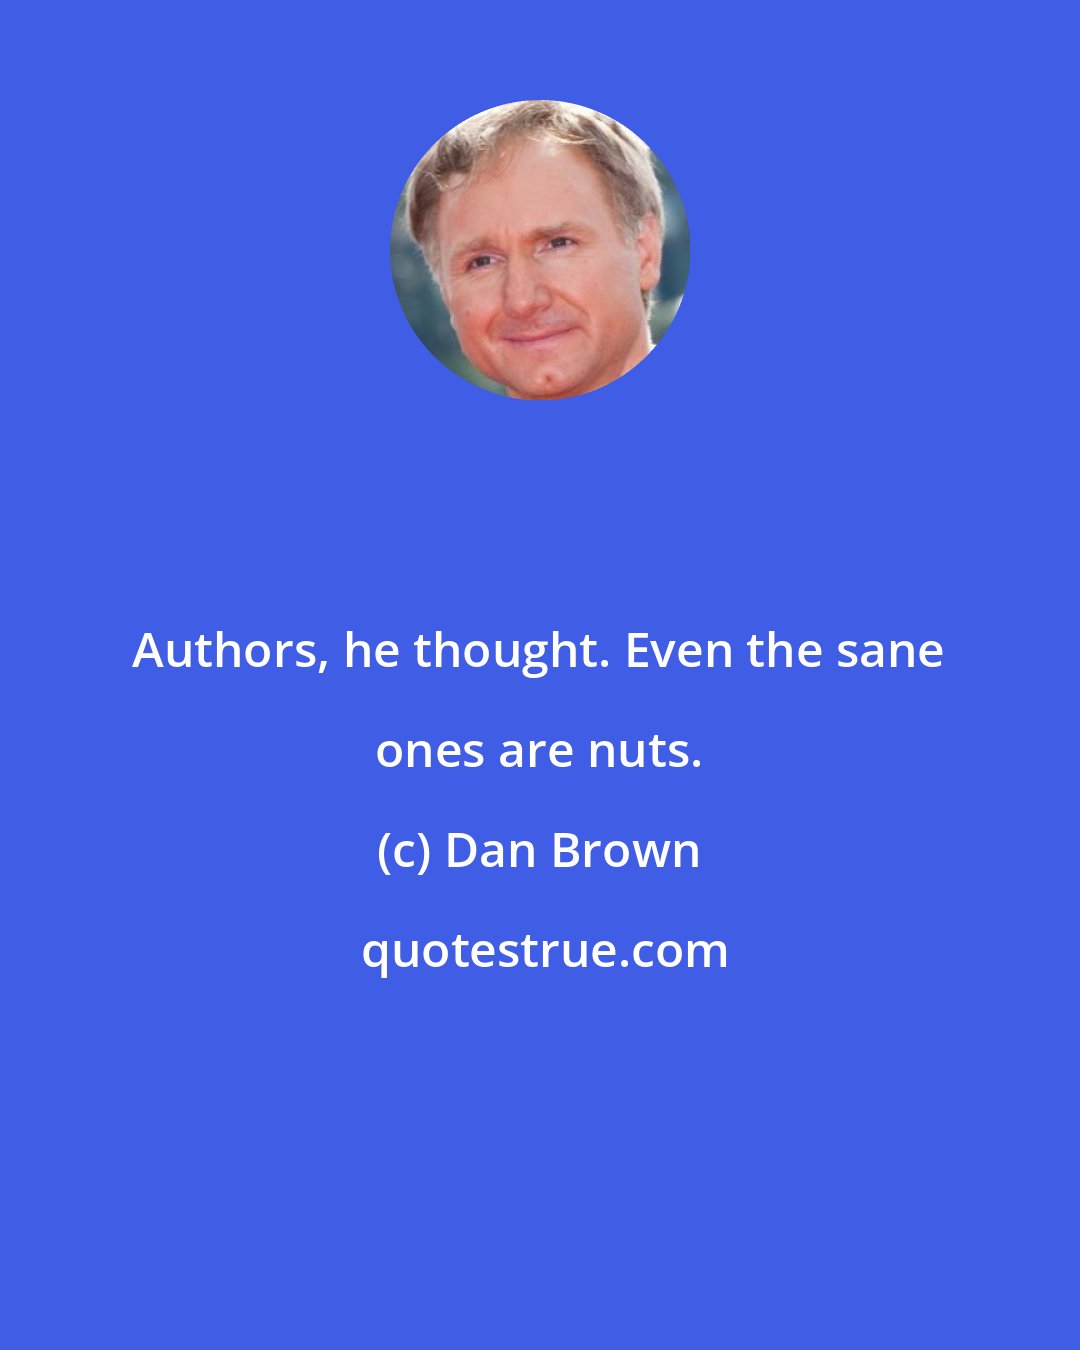 Dan Brown: Authors, he thought. Even the sane ones are nuts.